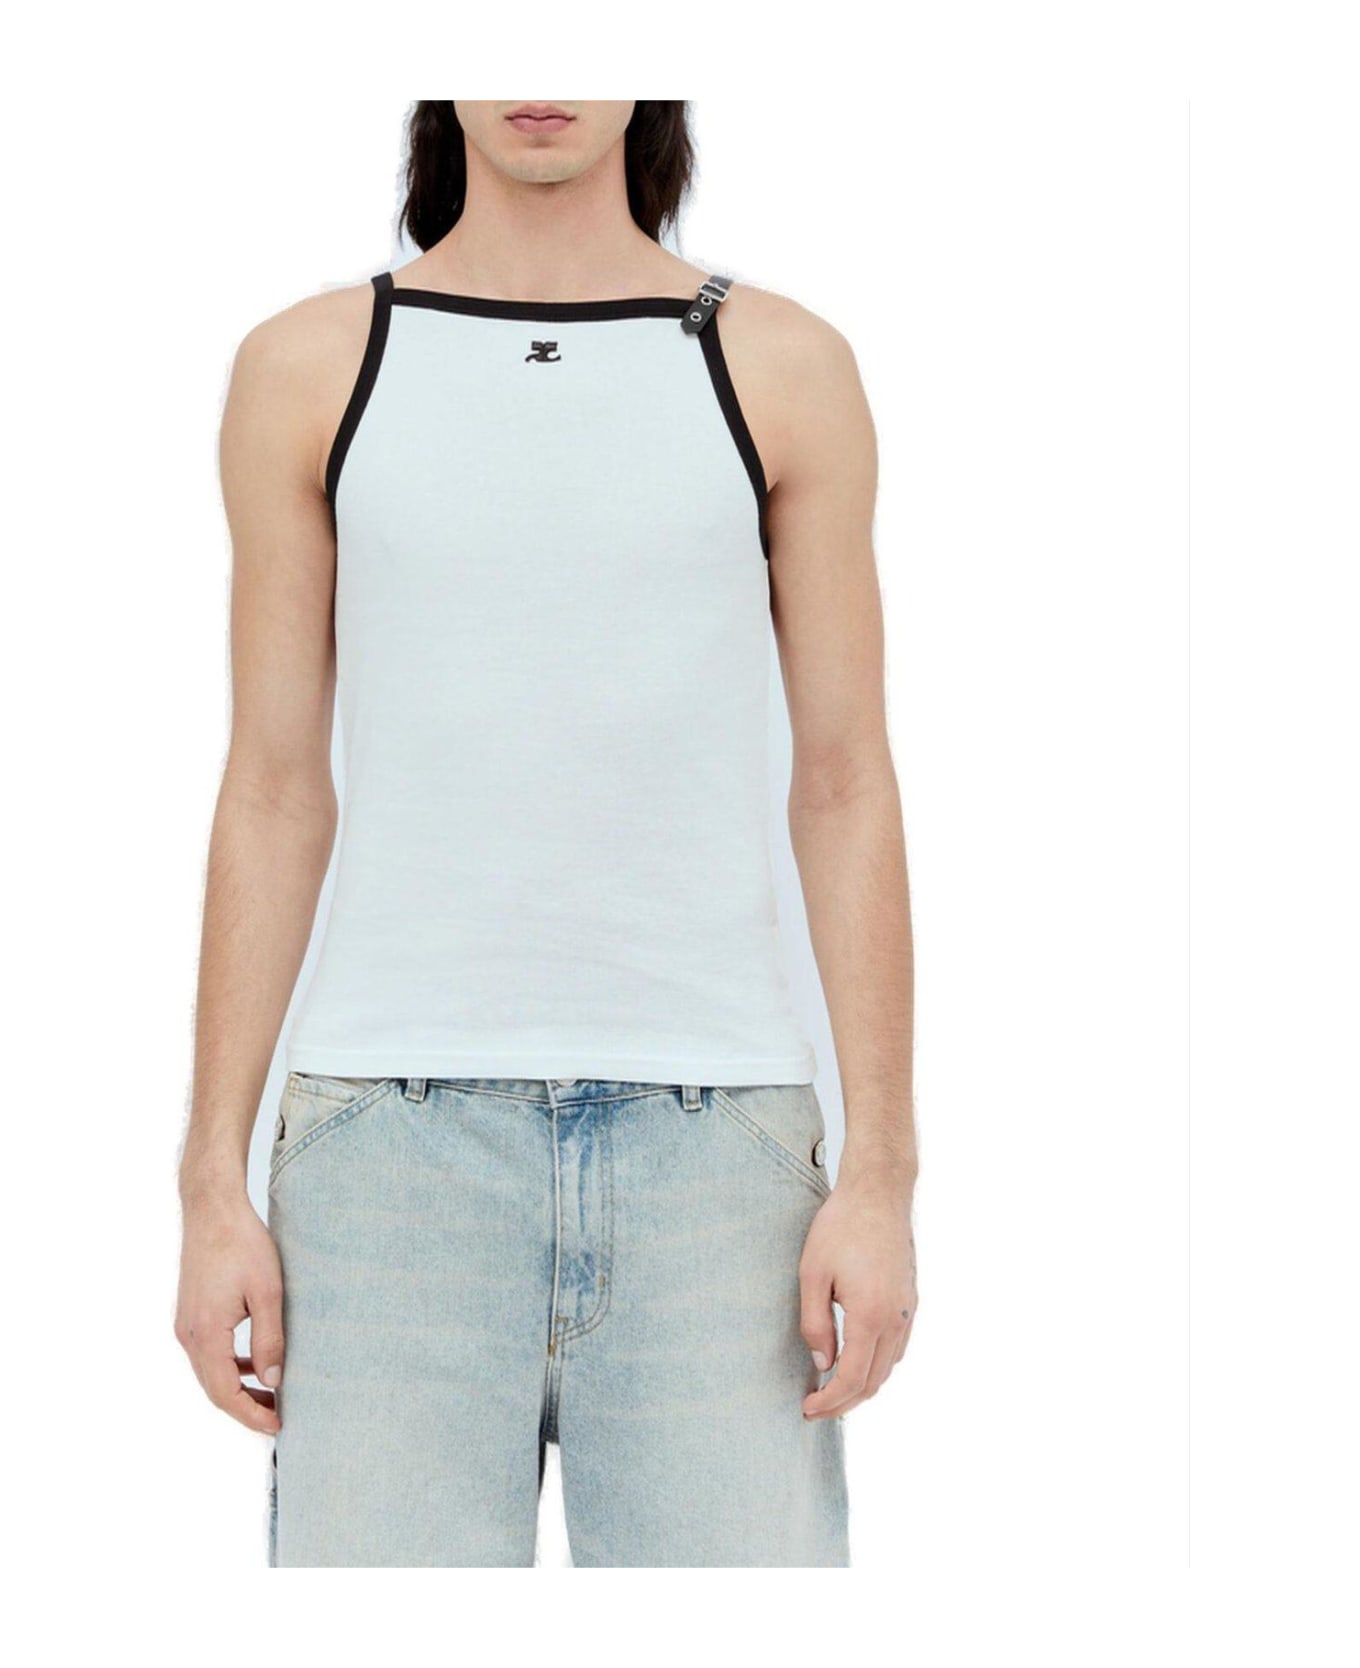 Courrèges Buckle Contrast Tank Top - WHITE/BLACK タンクトップ